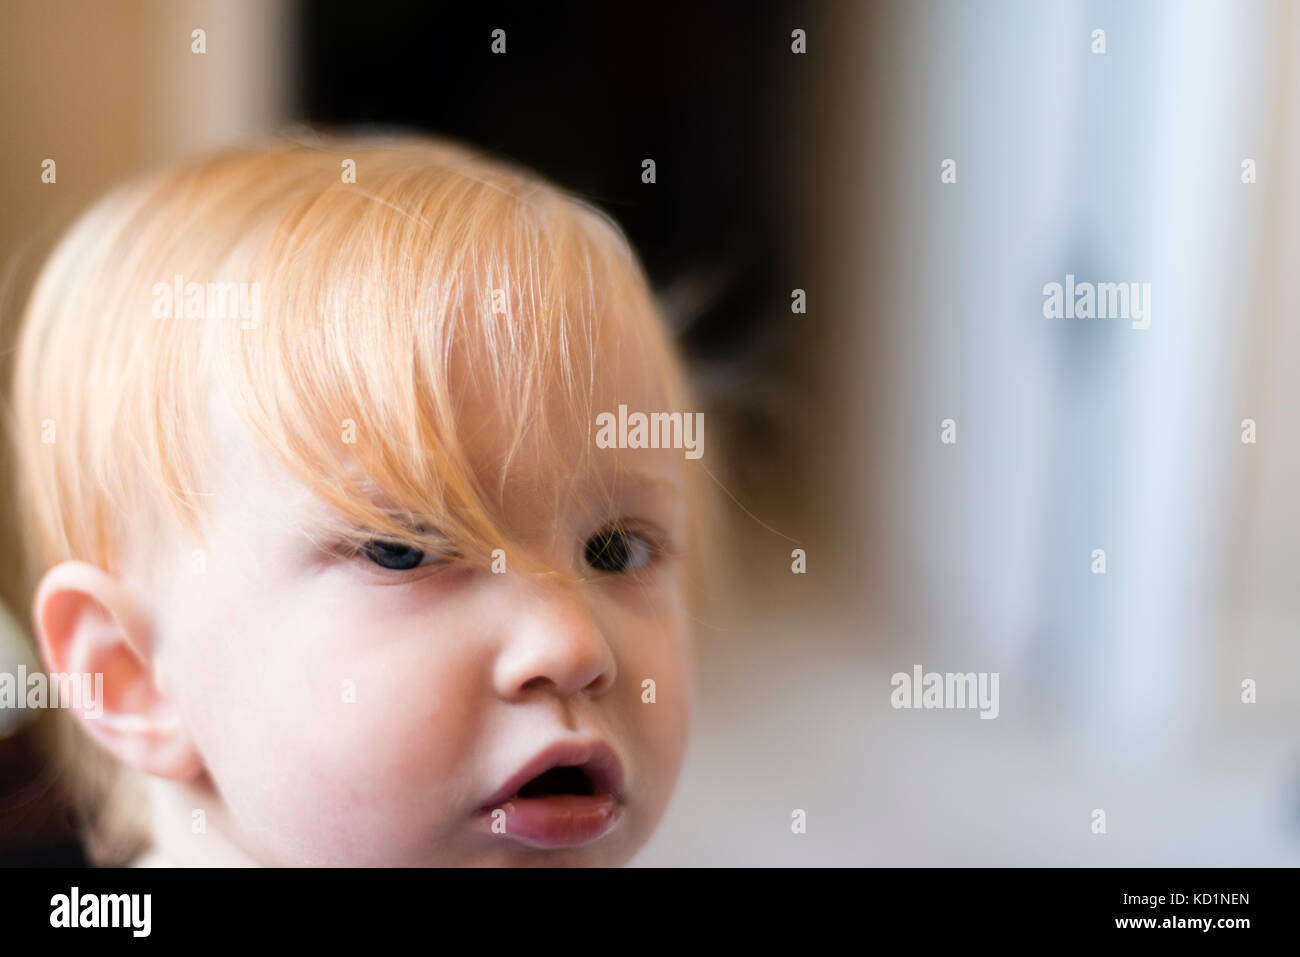 One-year-old girl with blonde hair looking at camera Stock Photo